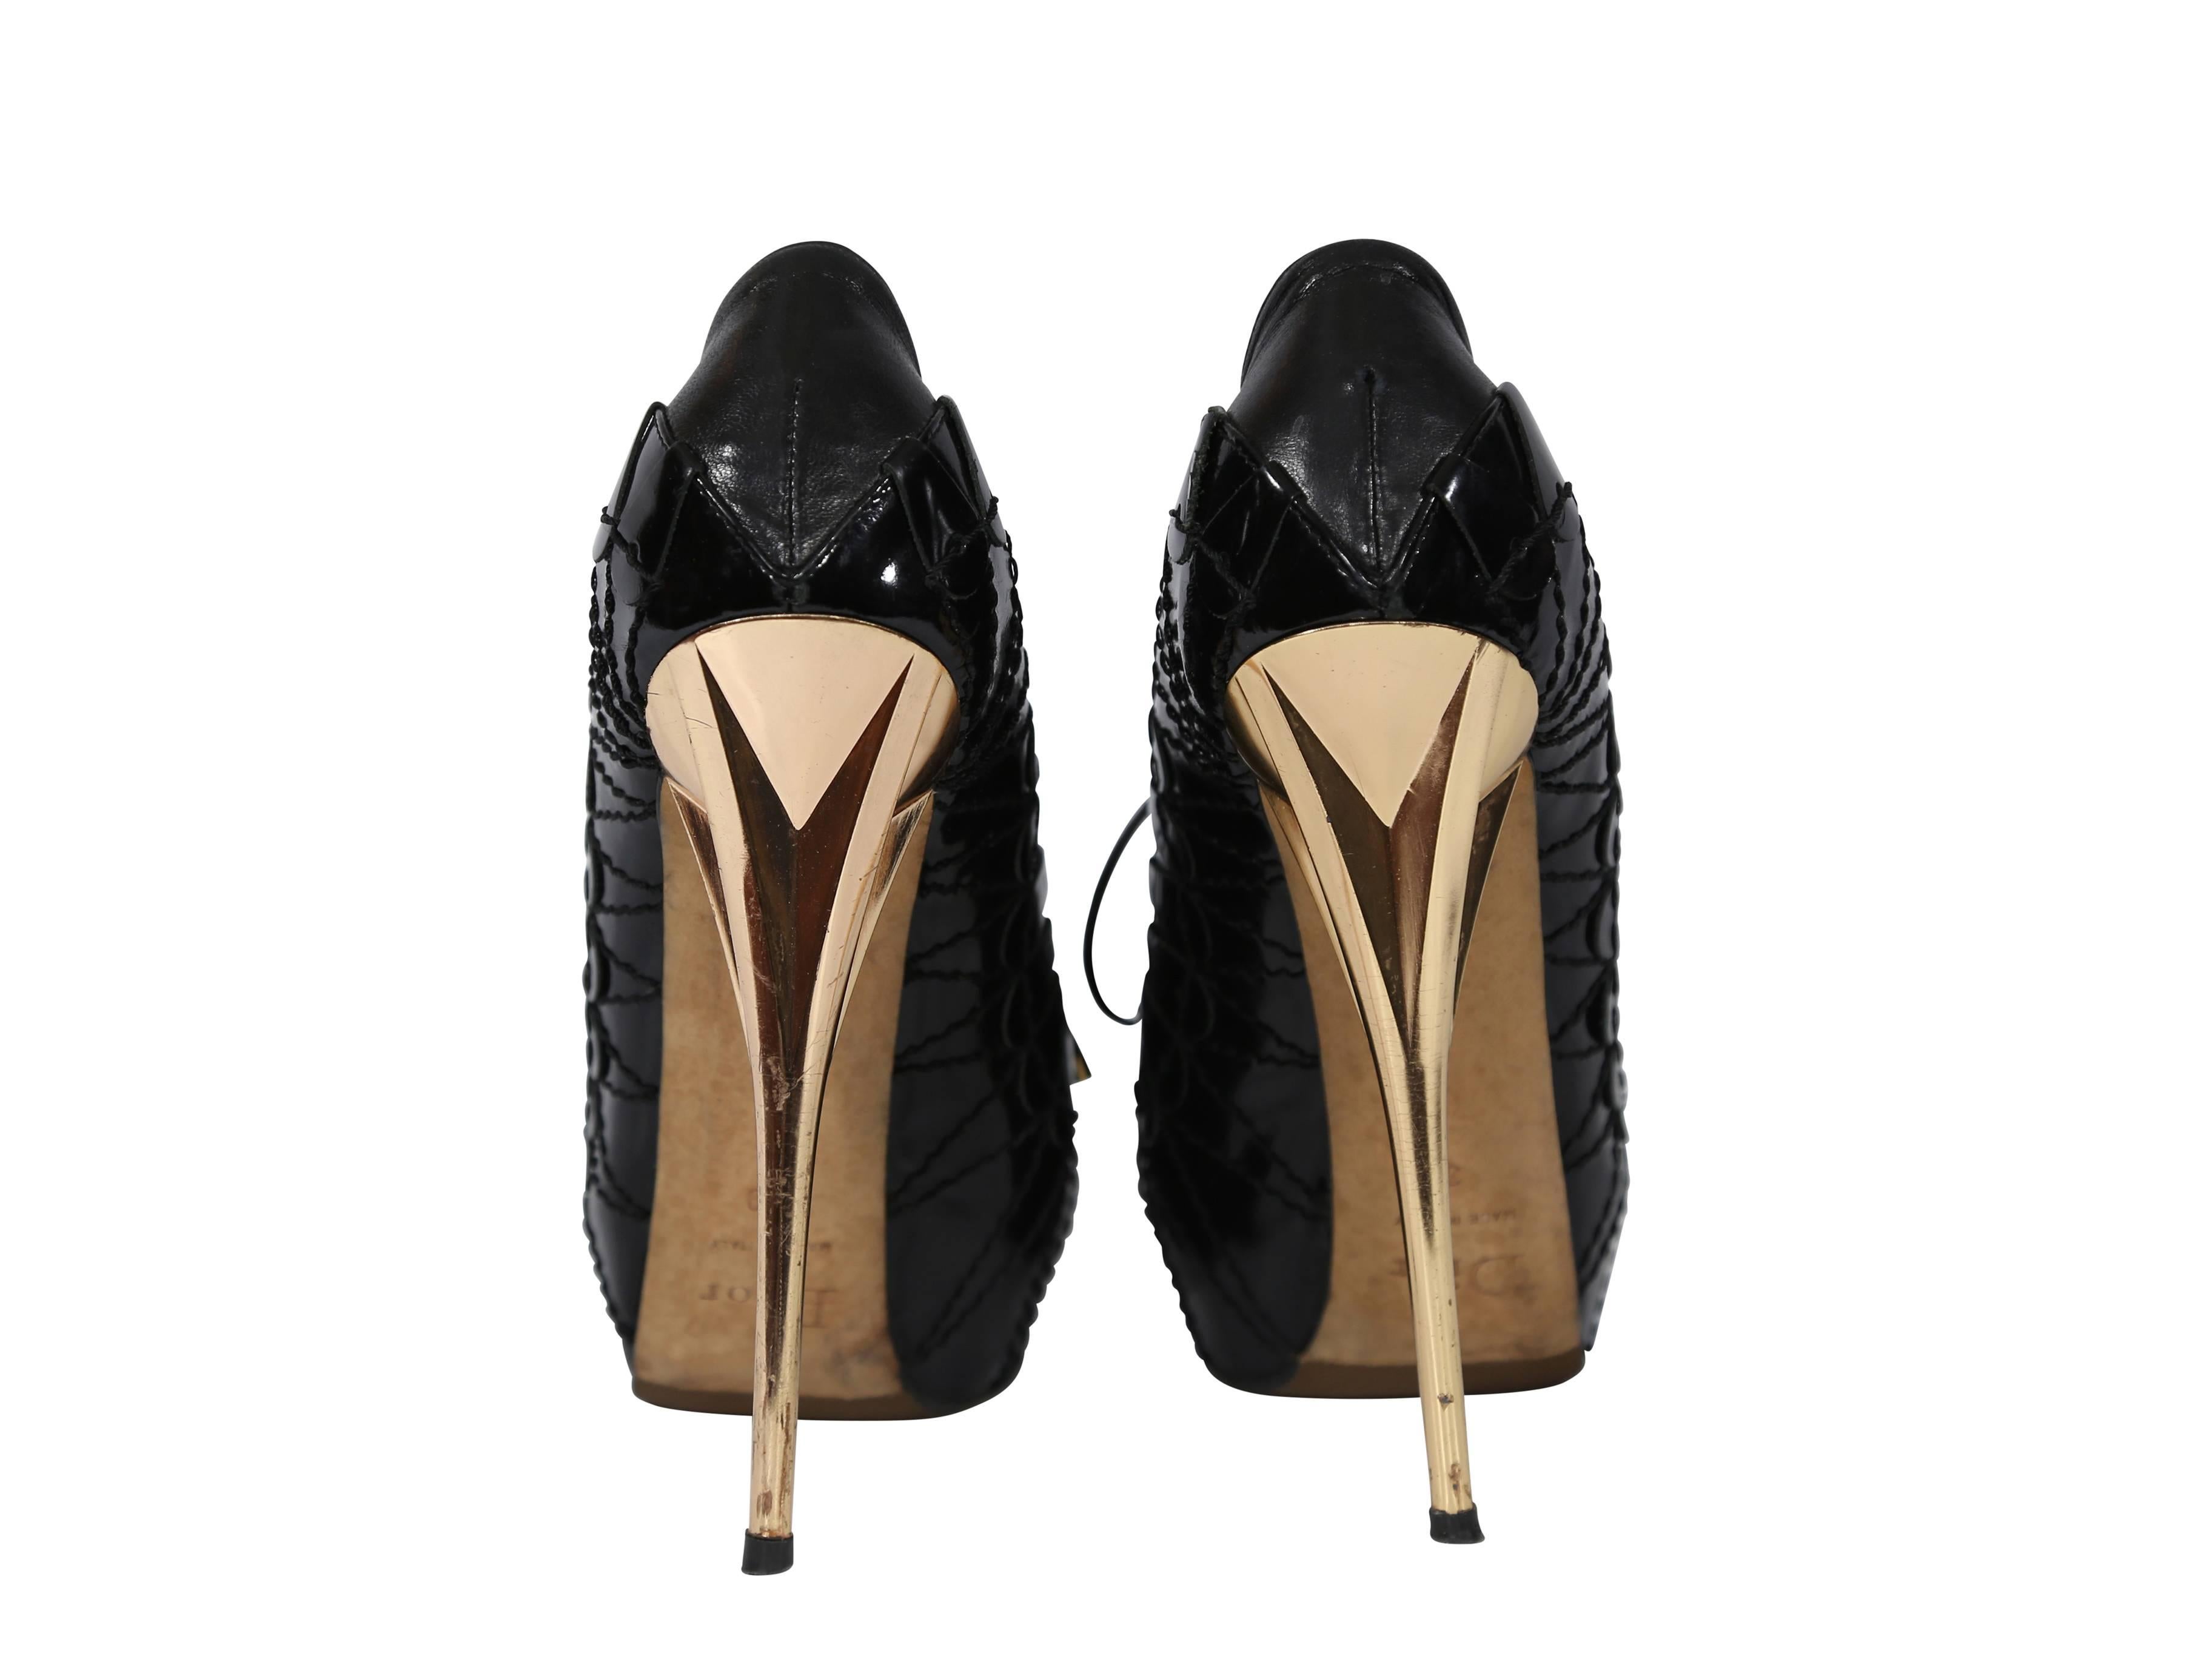 Black leather Christian Dior pumps accented with patent leather and tonal topstitching.  Metallic stiletto heel and covered platform.  Lace-front closure.